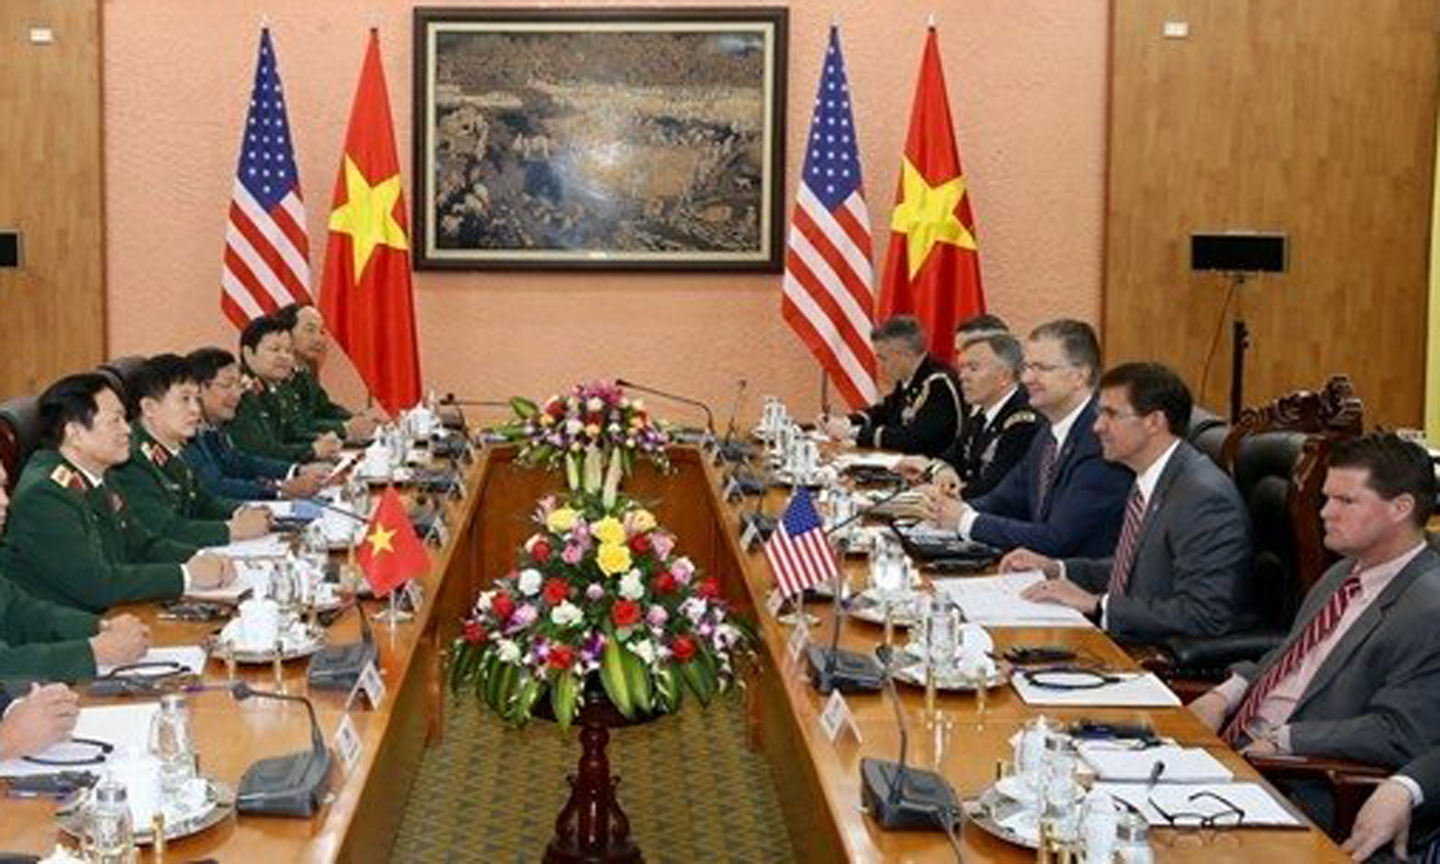  Defence Minister General Ngo Xuan Lich holds talks with US Secretary of Defence Mark Esper in Hanoi on November 20. (Photo: VNA)